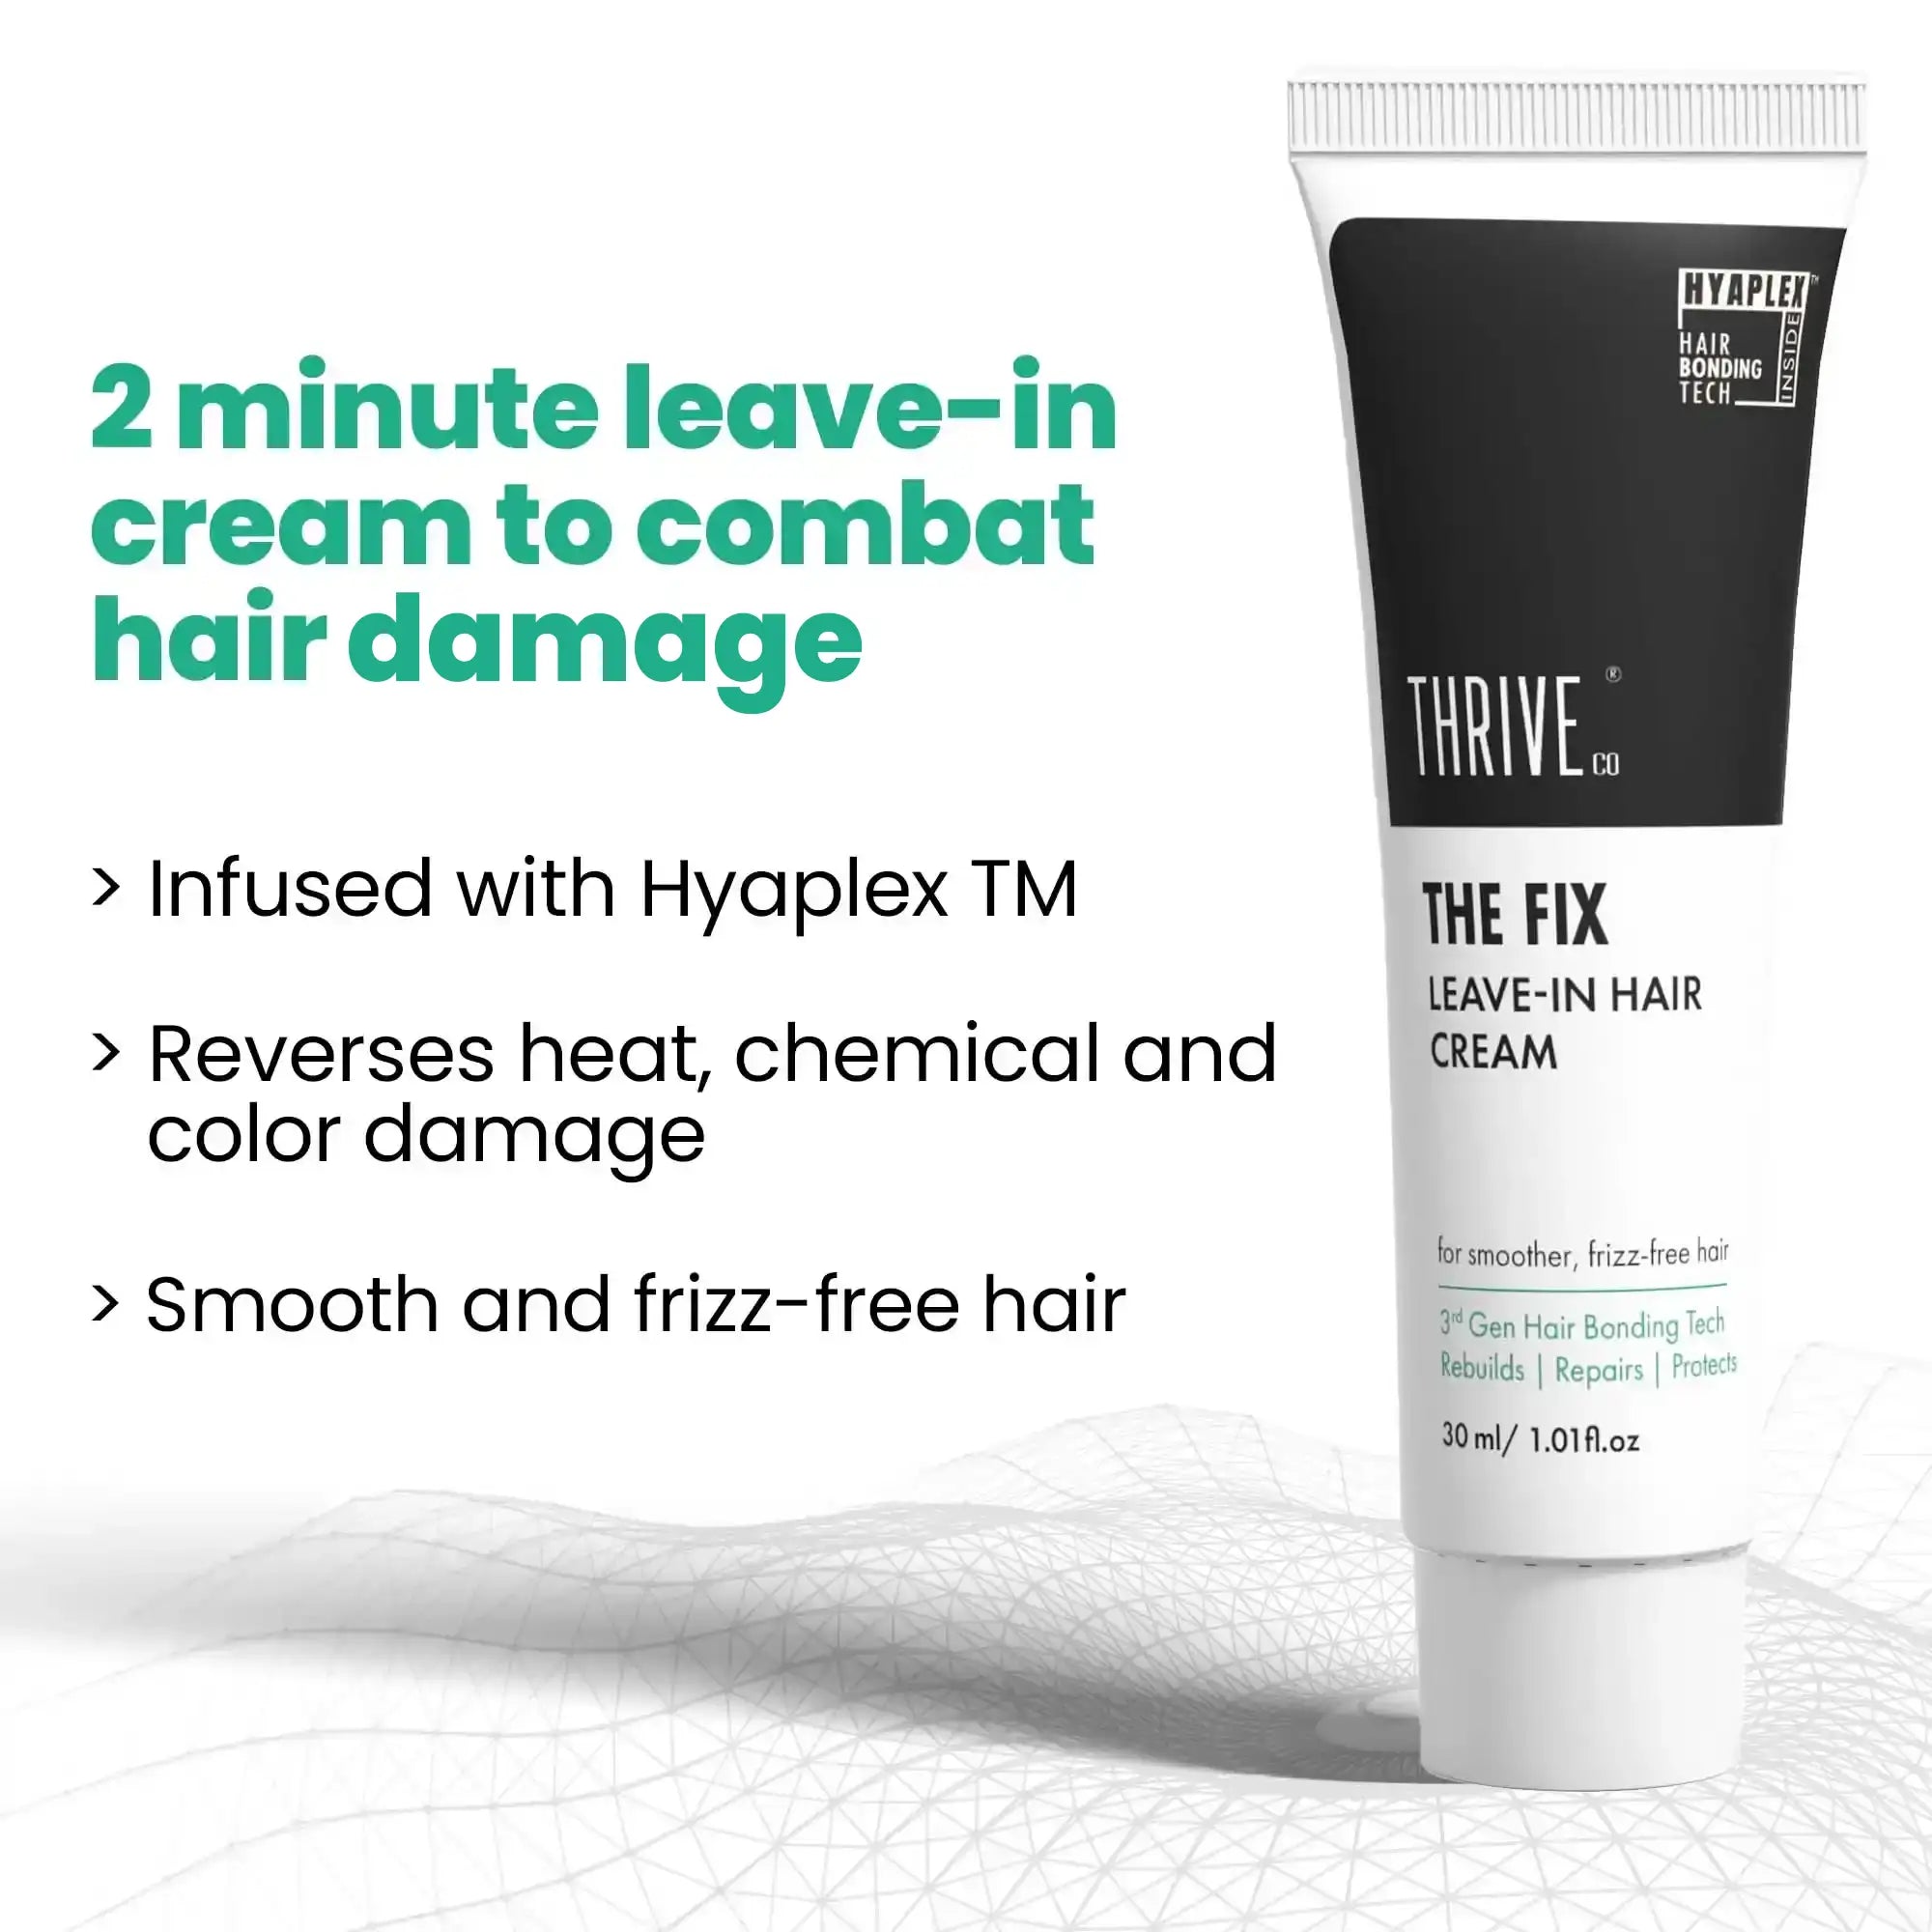 thriveco the fix is a leave-in cream for damaged hair